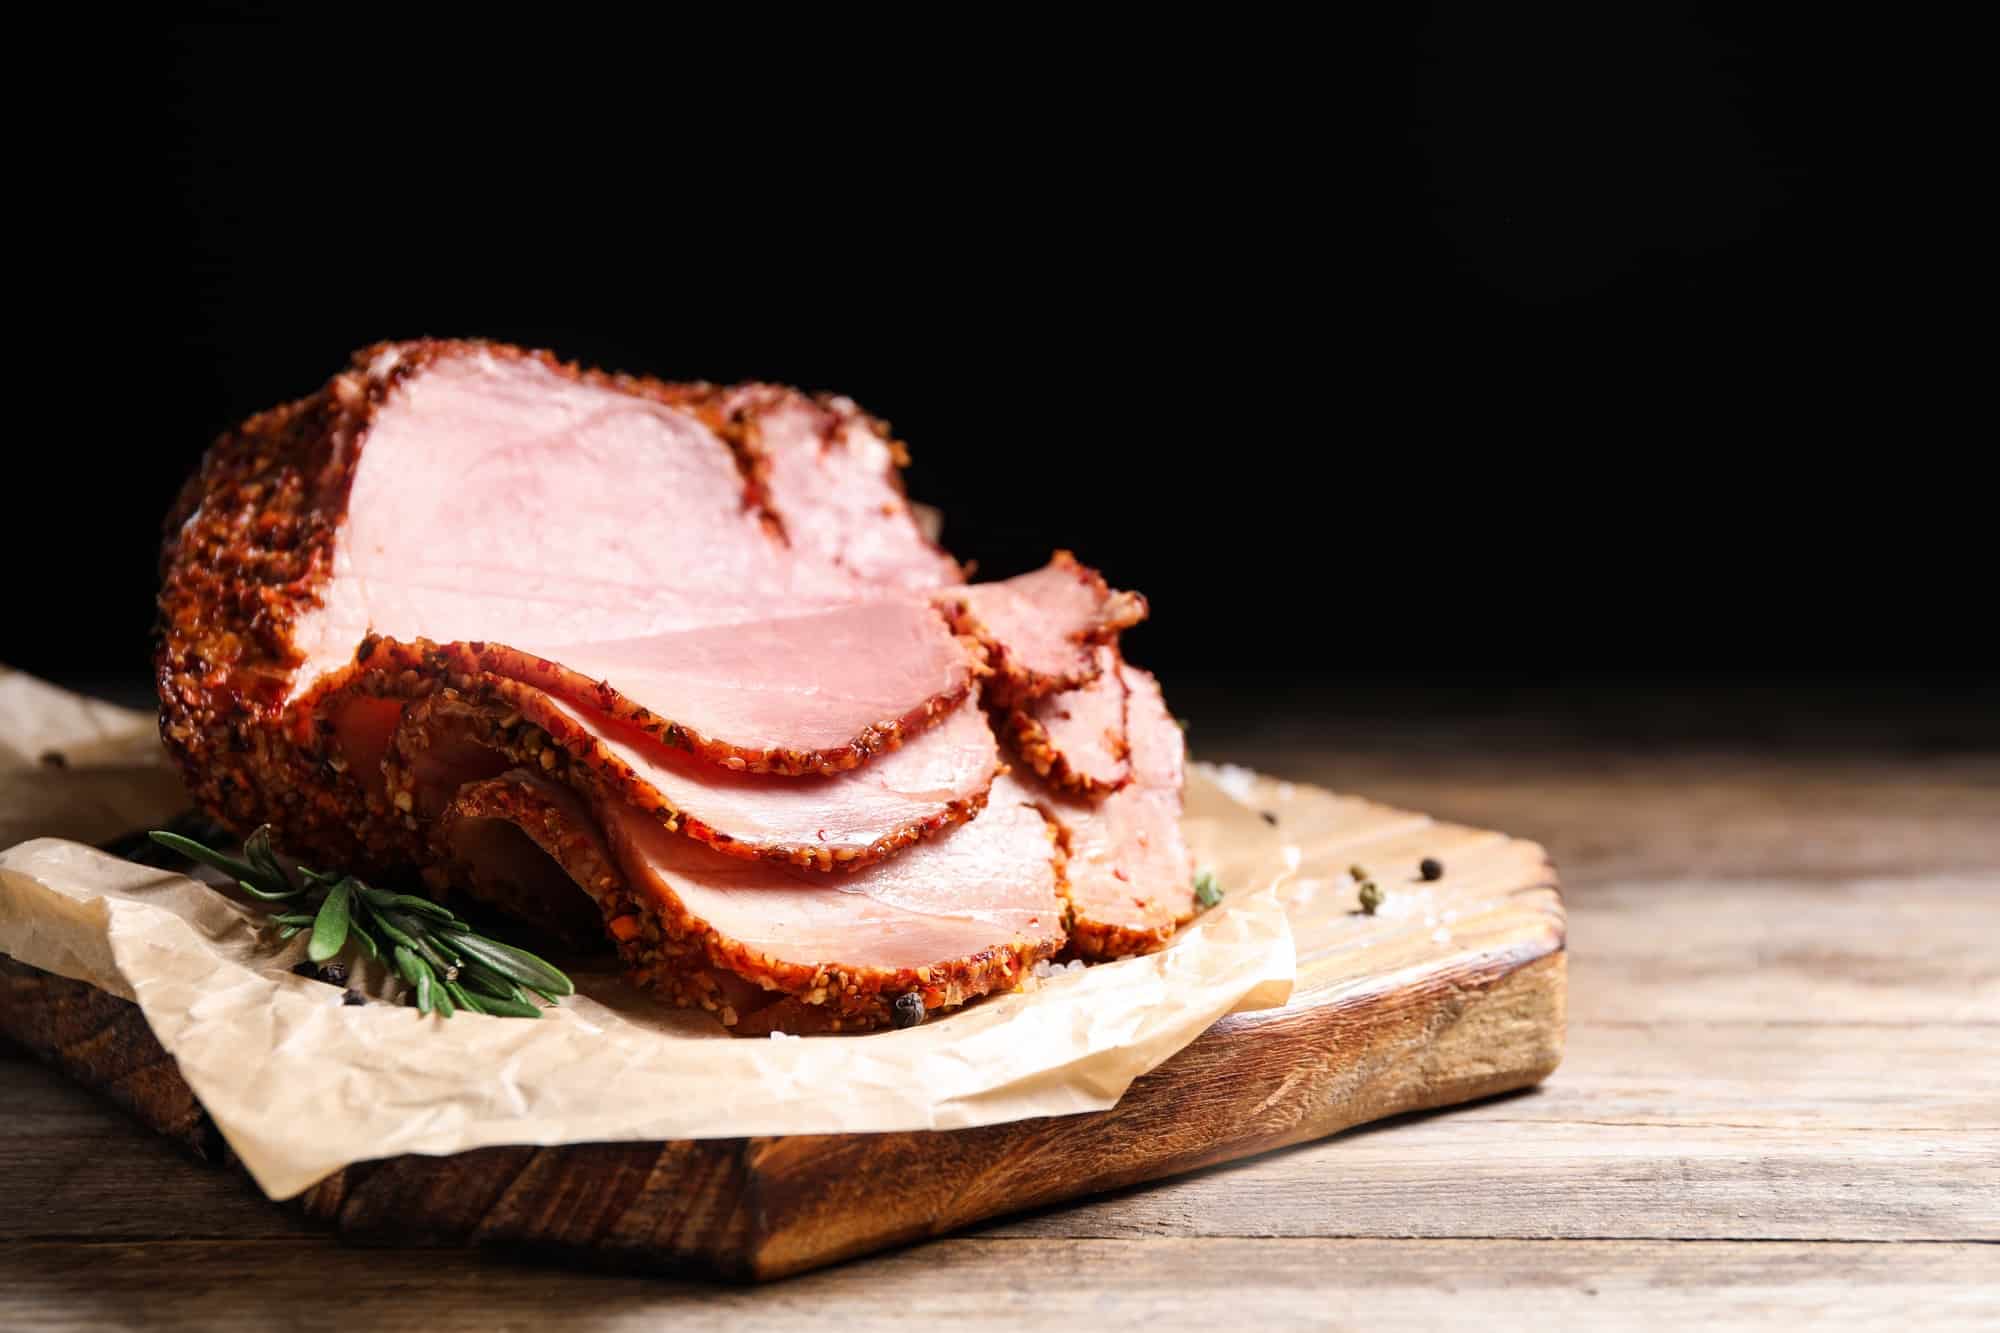 What Herbs Go Well With Ham